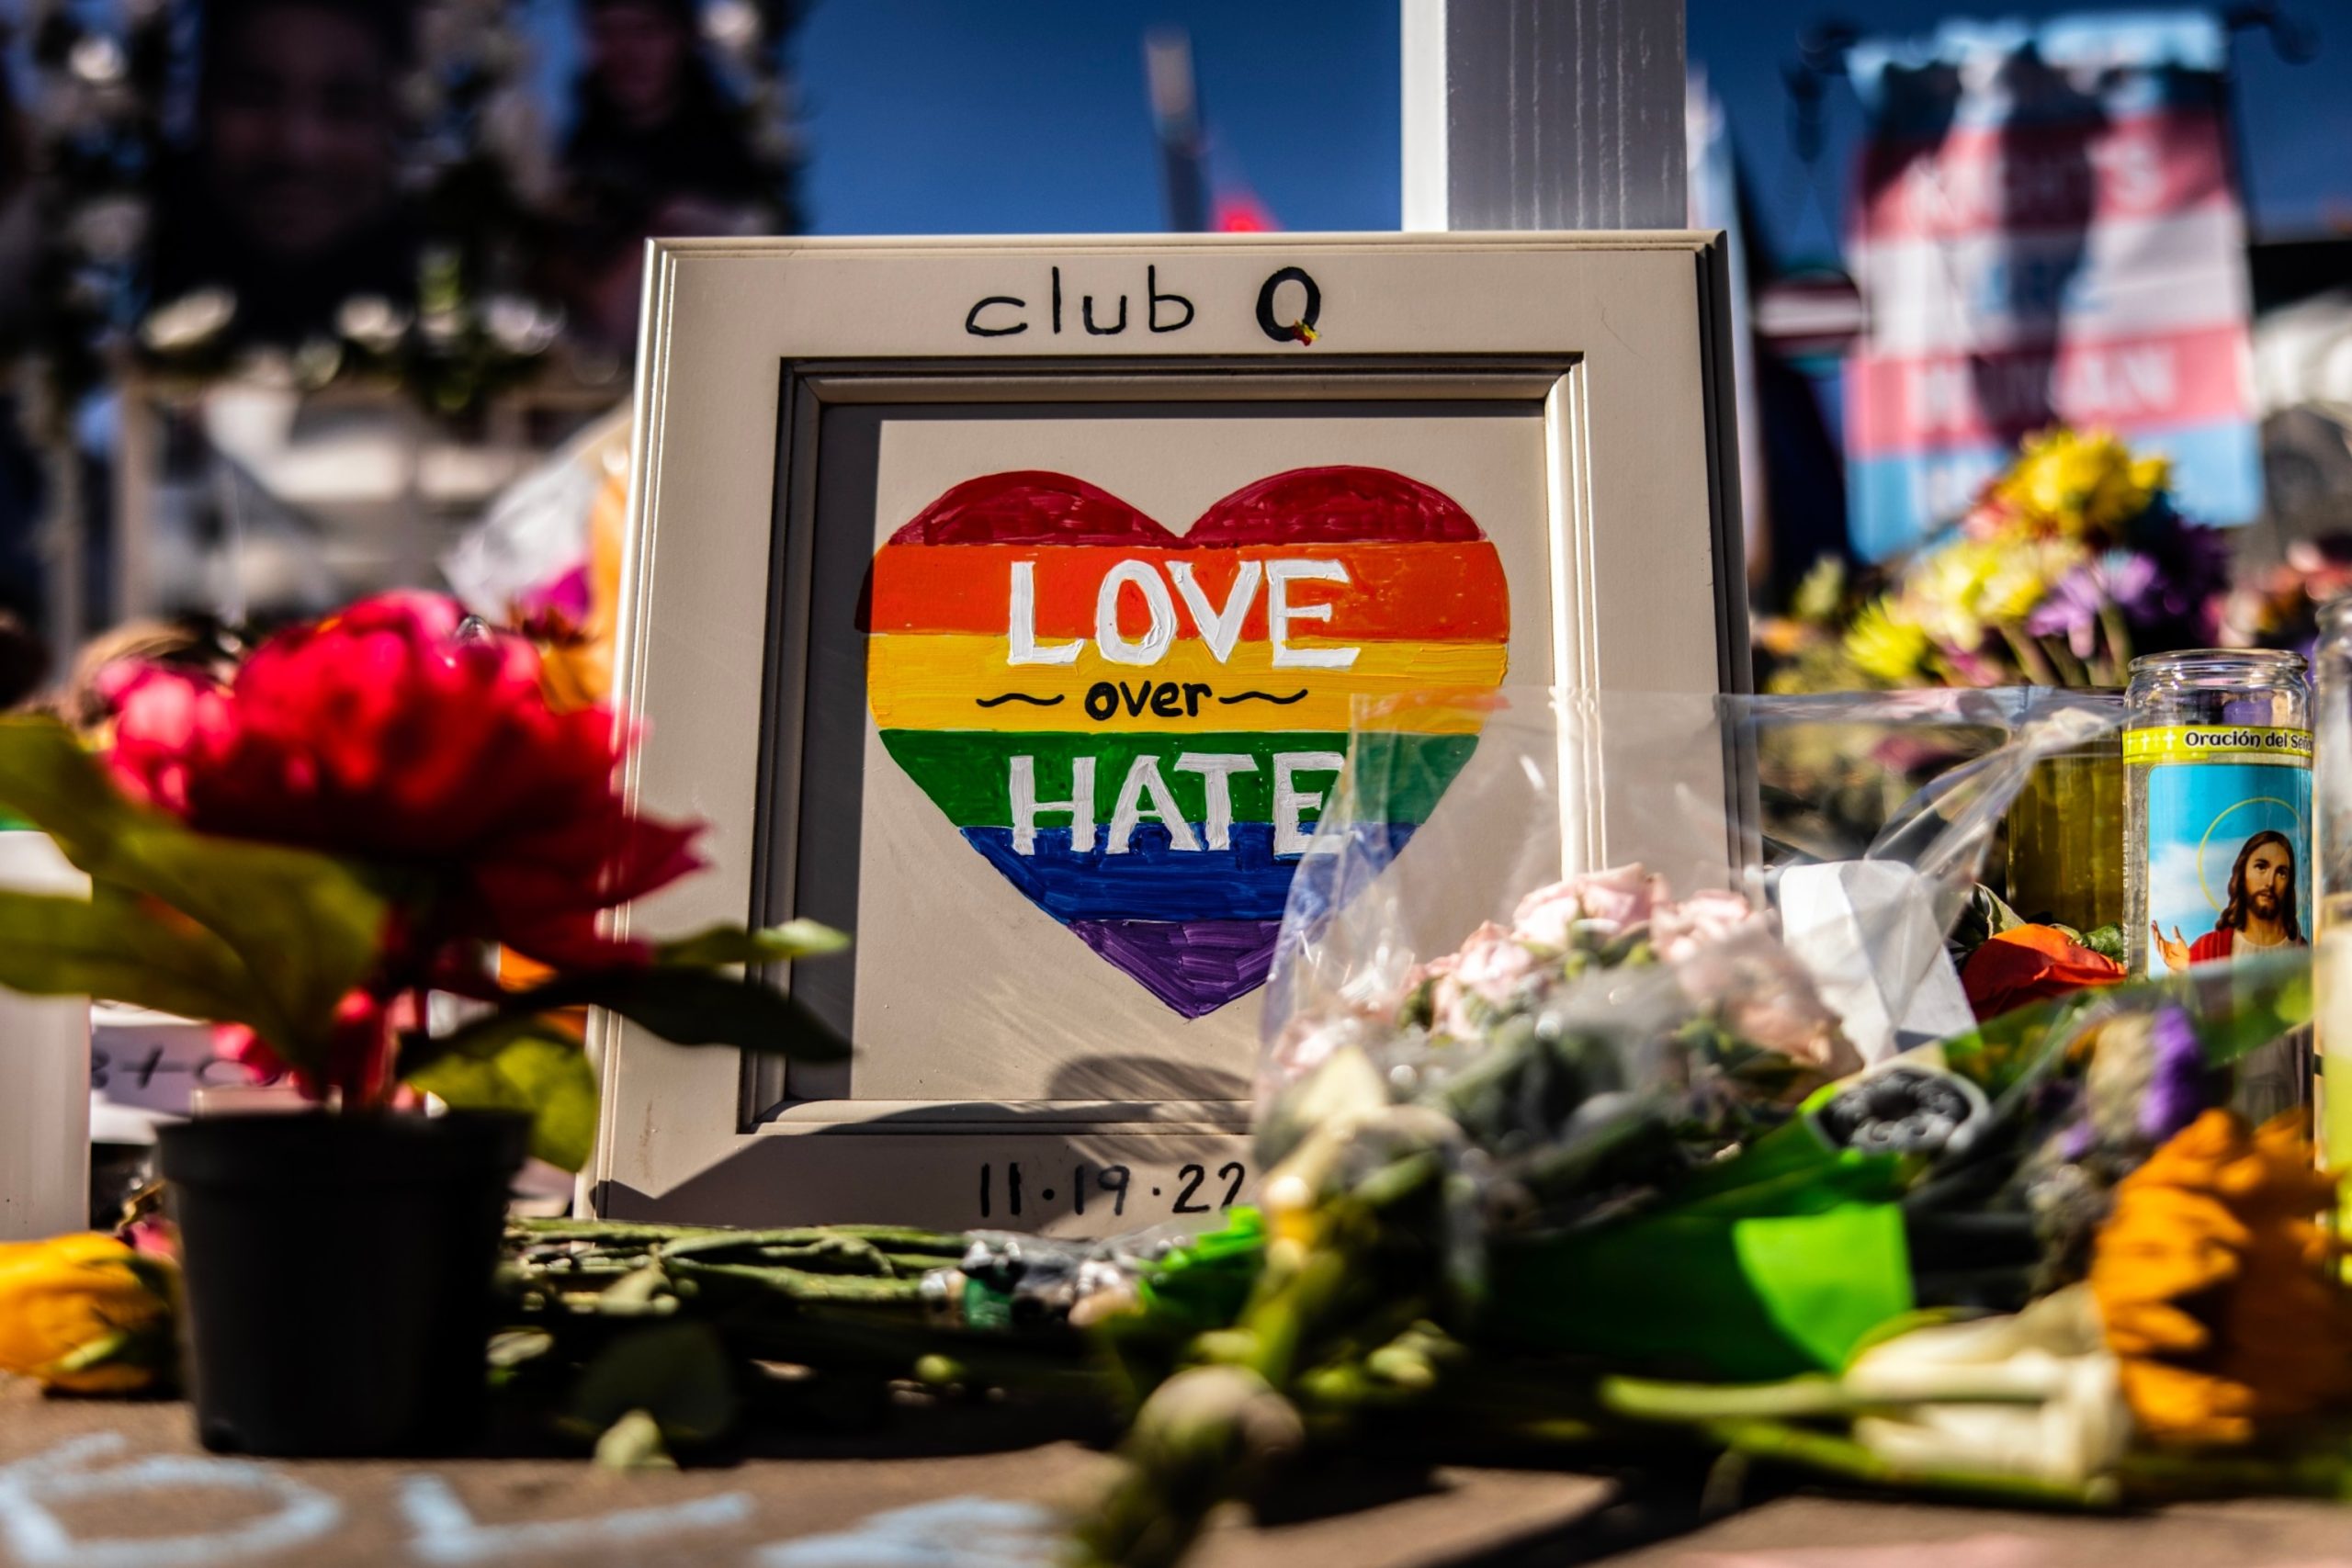 Club Q shooter to plead guilty to 74 federal hate crime and gun charges